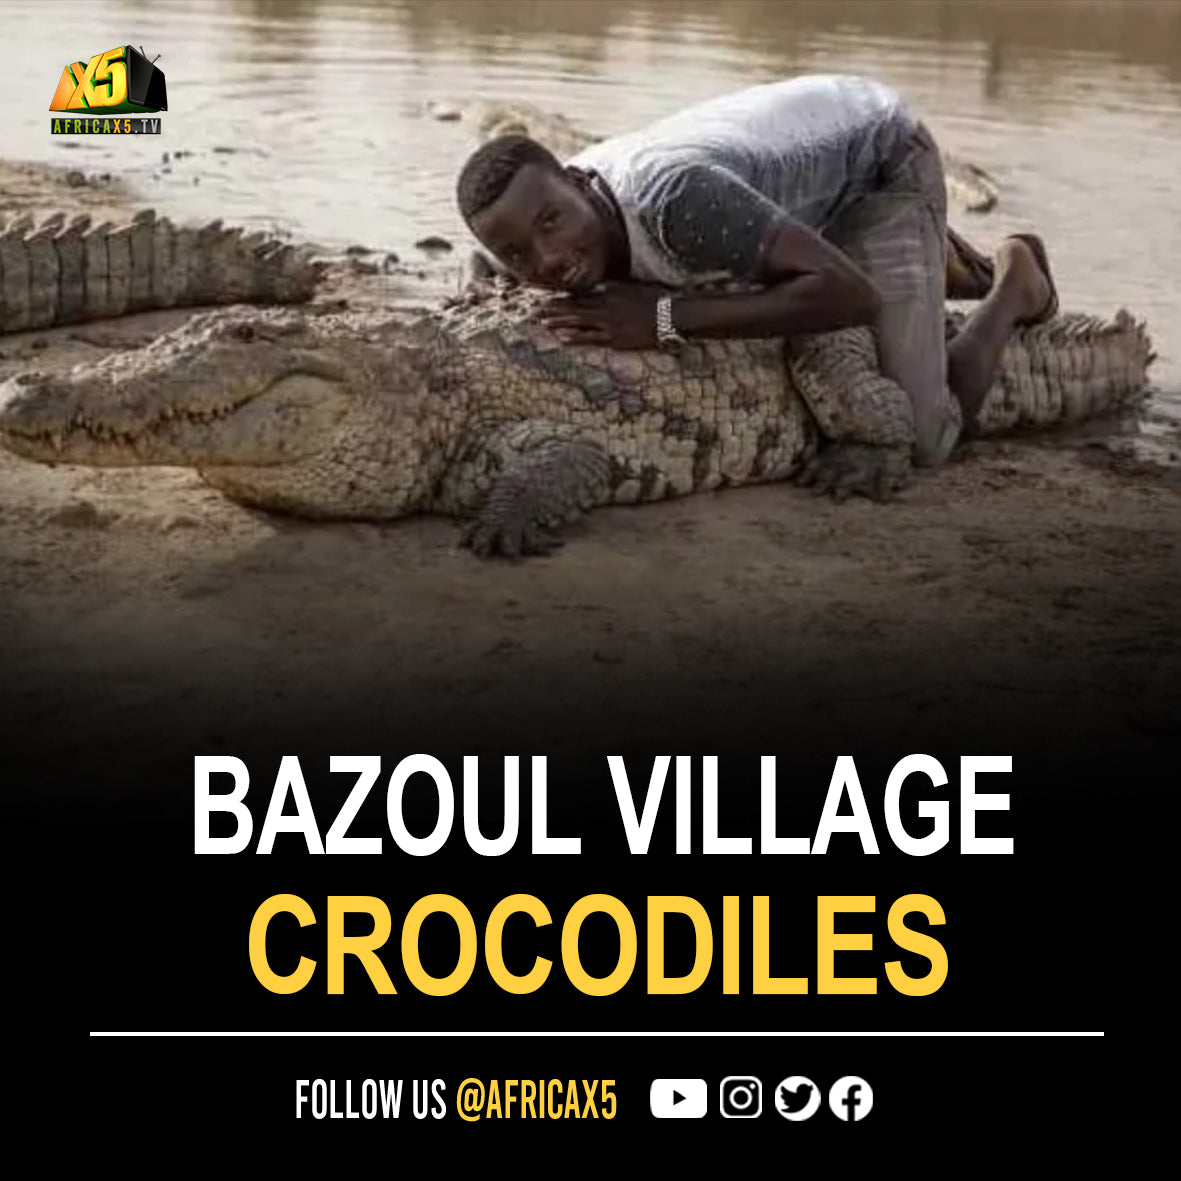 Crocodiles may be one of the deadliest hunters in the animal kingdom, but in a small village Bazoul in Burkina Faso, it is not unusual to see someone sitting on top one